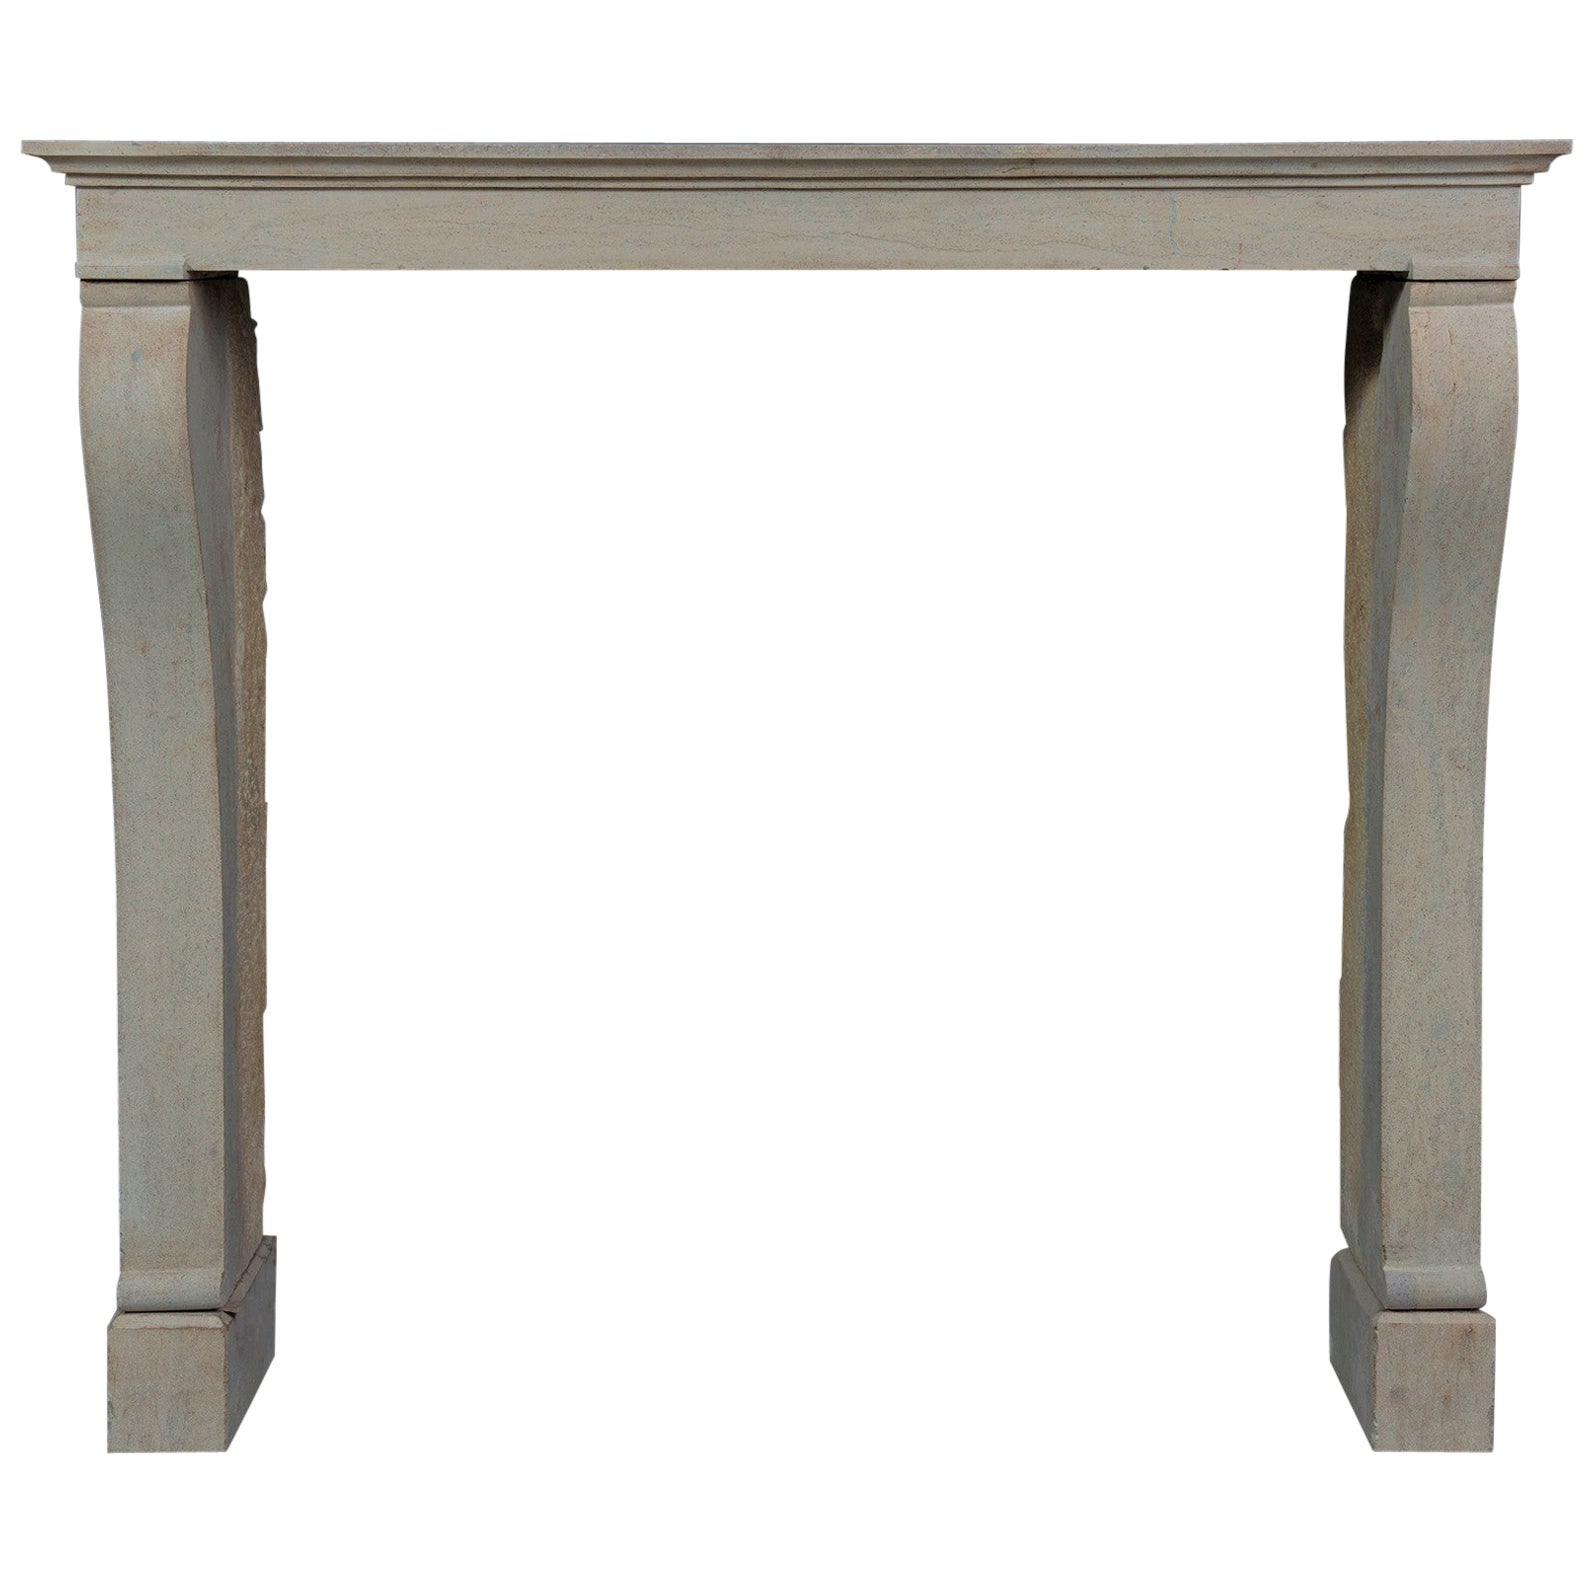 Tall Antique French Limestone Fireplace Mantel